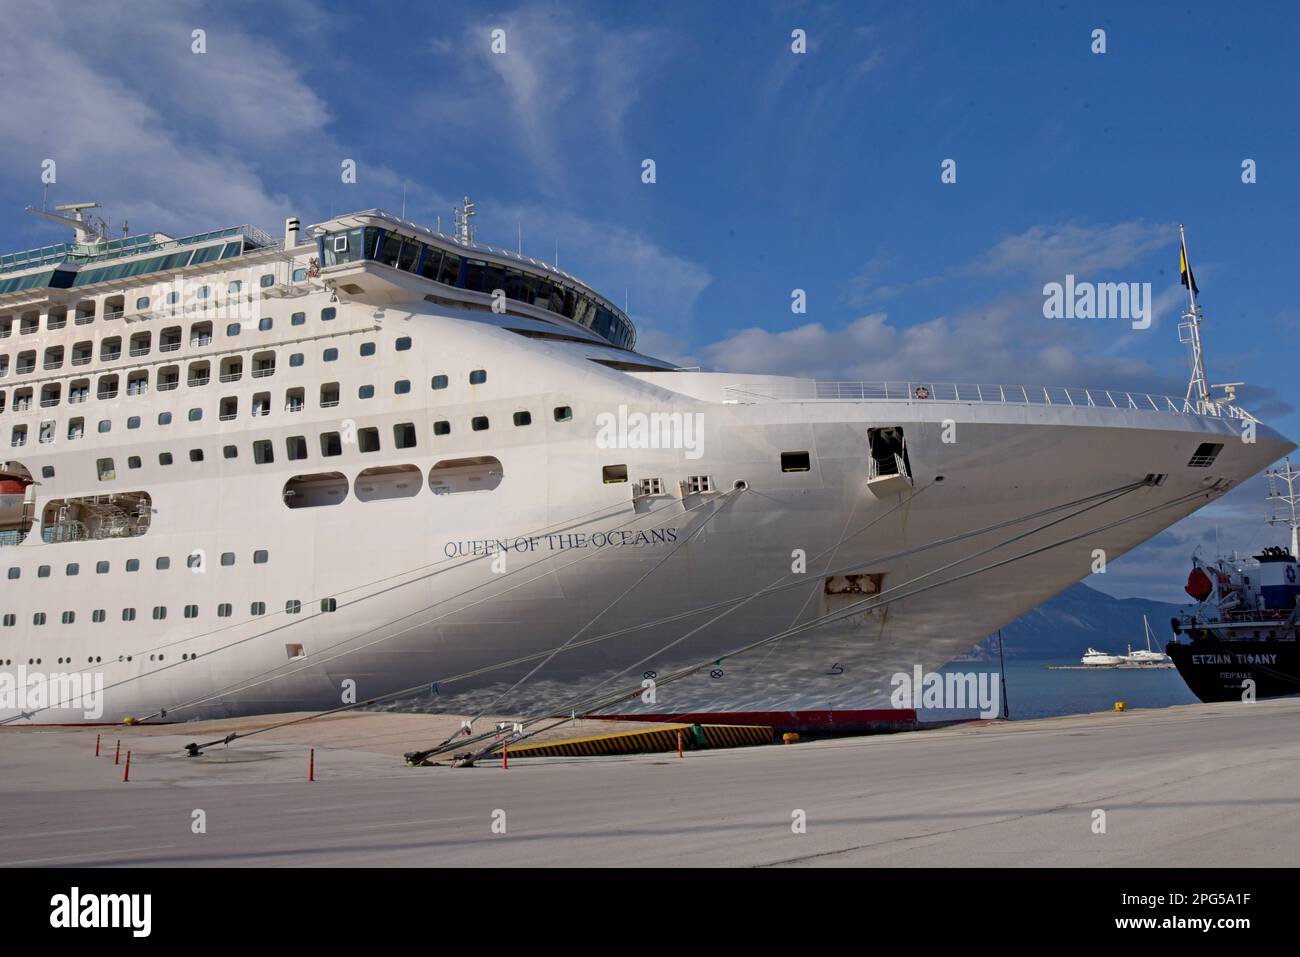 The cruise ship Queen of the Oceans owned by the Iliopoulos family ...